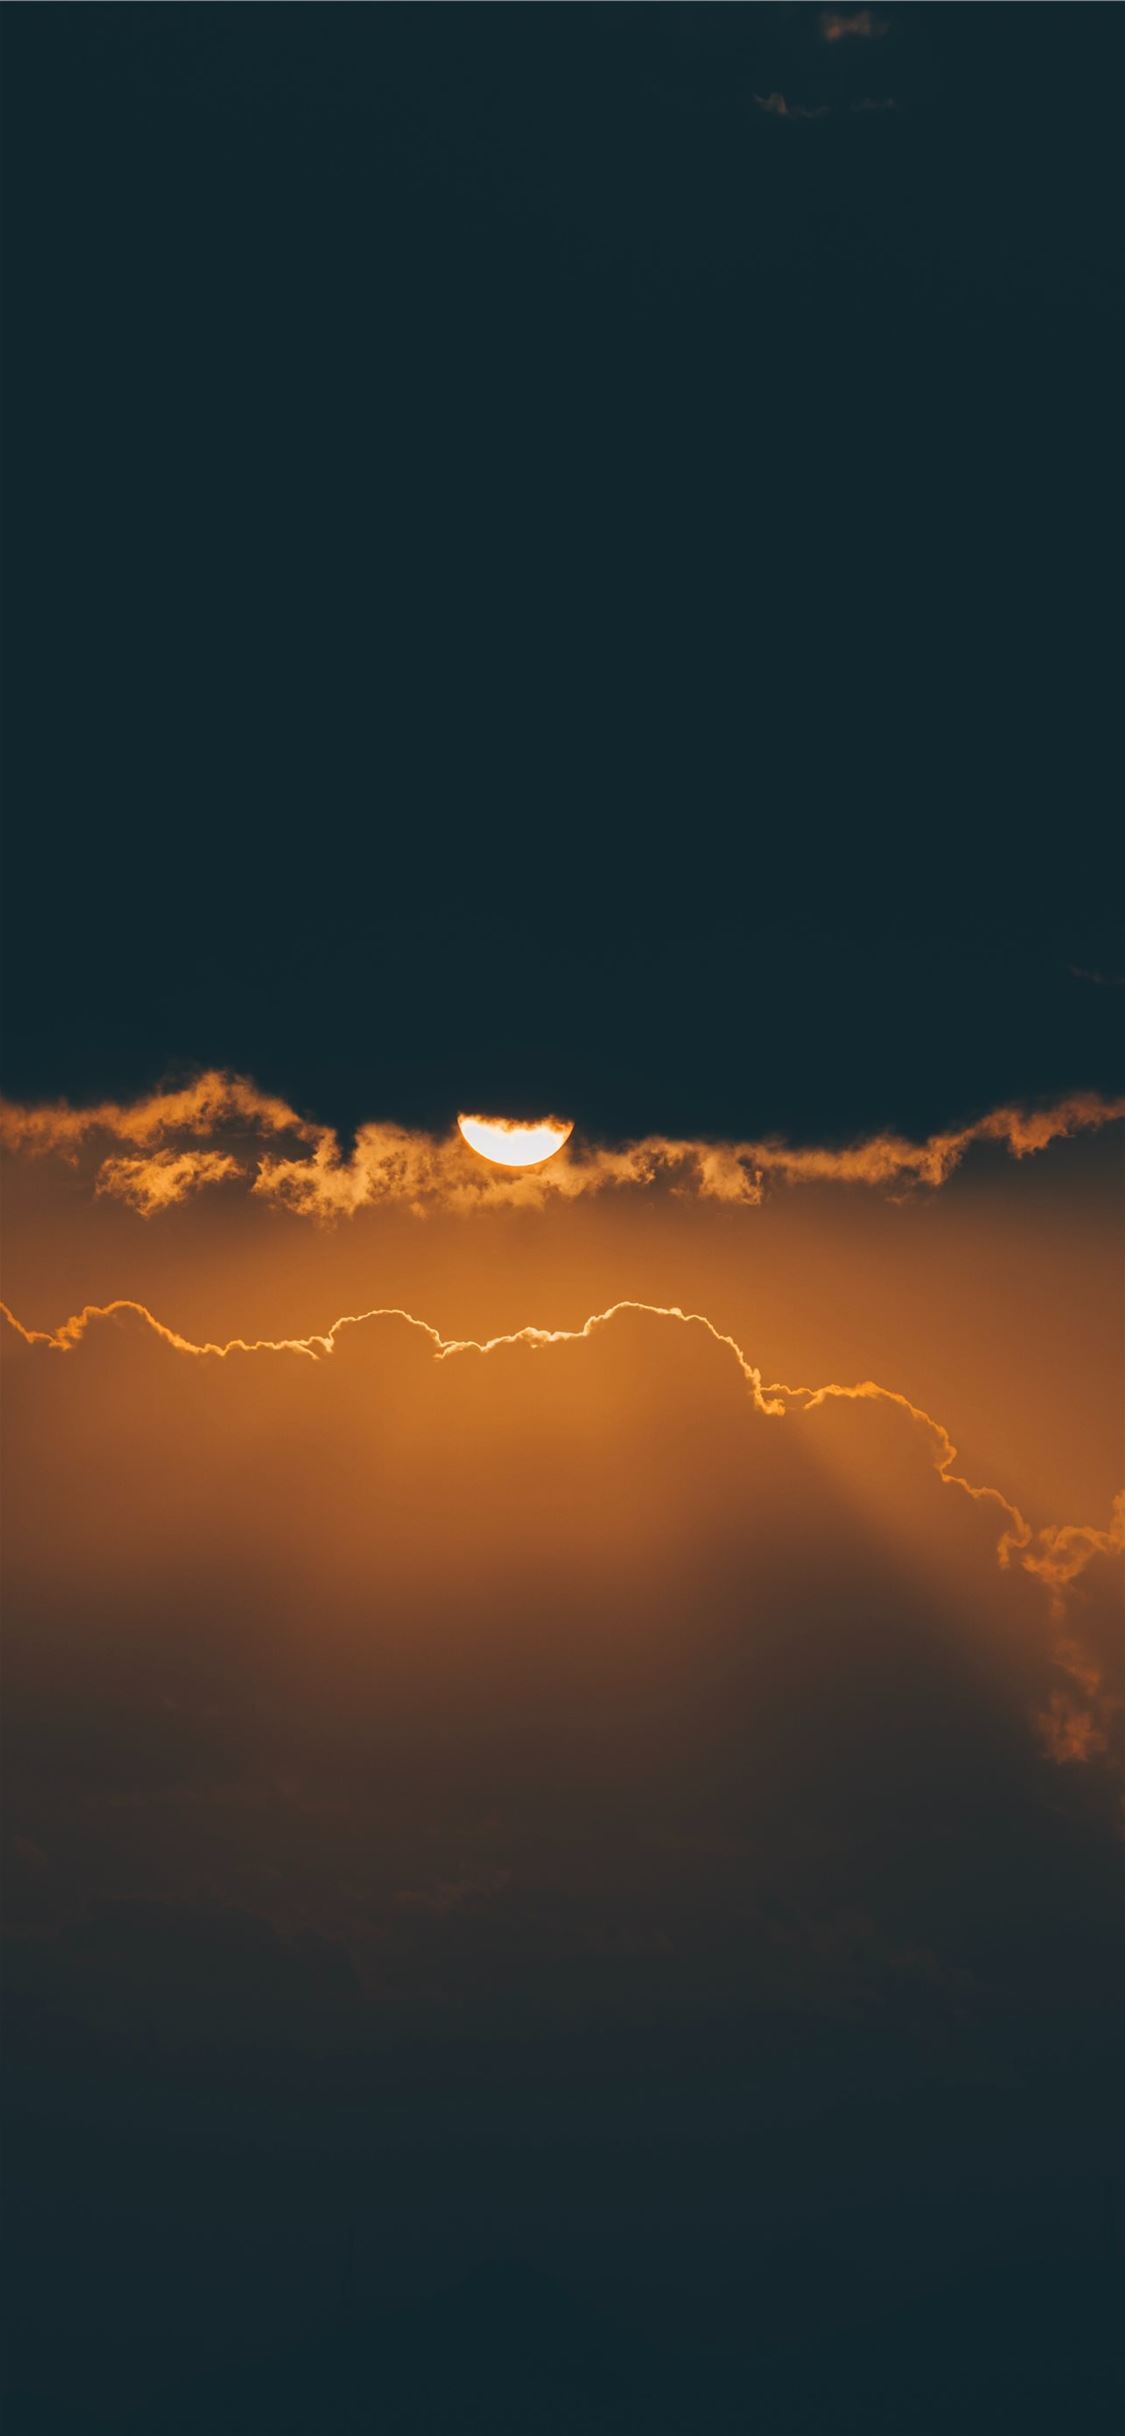 orange and black clouds during sunset iPhone X Wallpaper Free Download